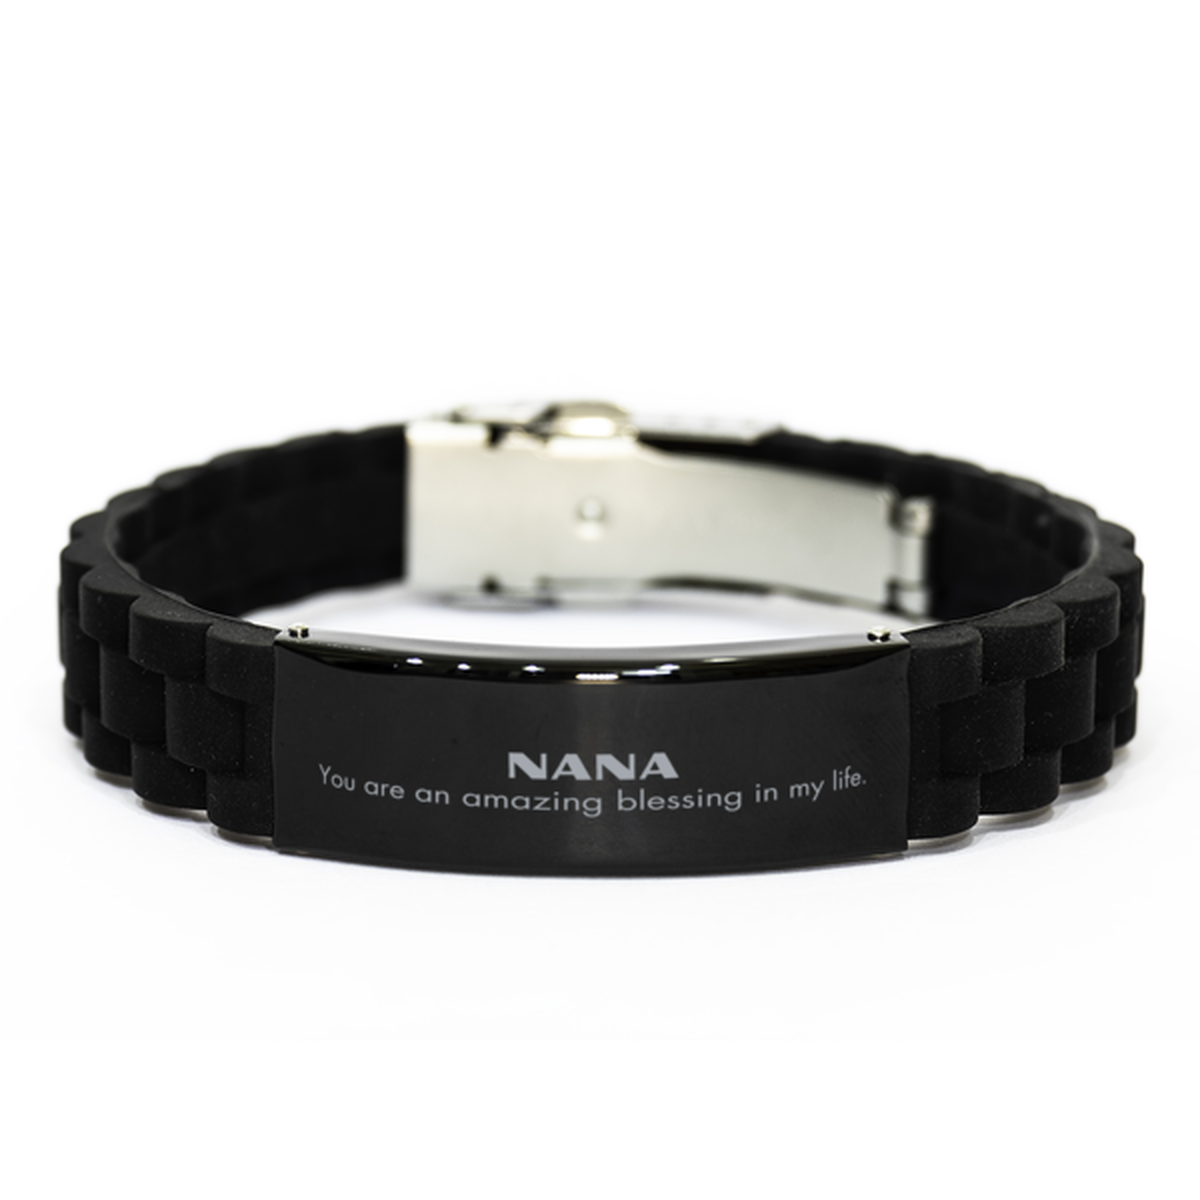 Nana Black Glidelock Clasp Bracelet, You are an amazing blessing in my life, Thank You Gifts For Nana, Inspirational Birthday Christmas Unique Gifts For Nana